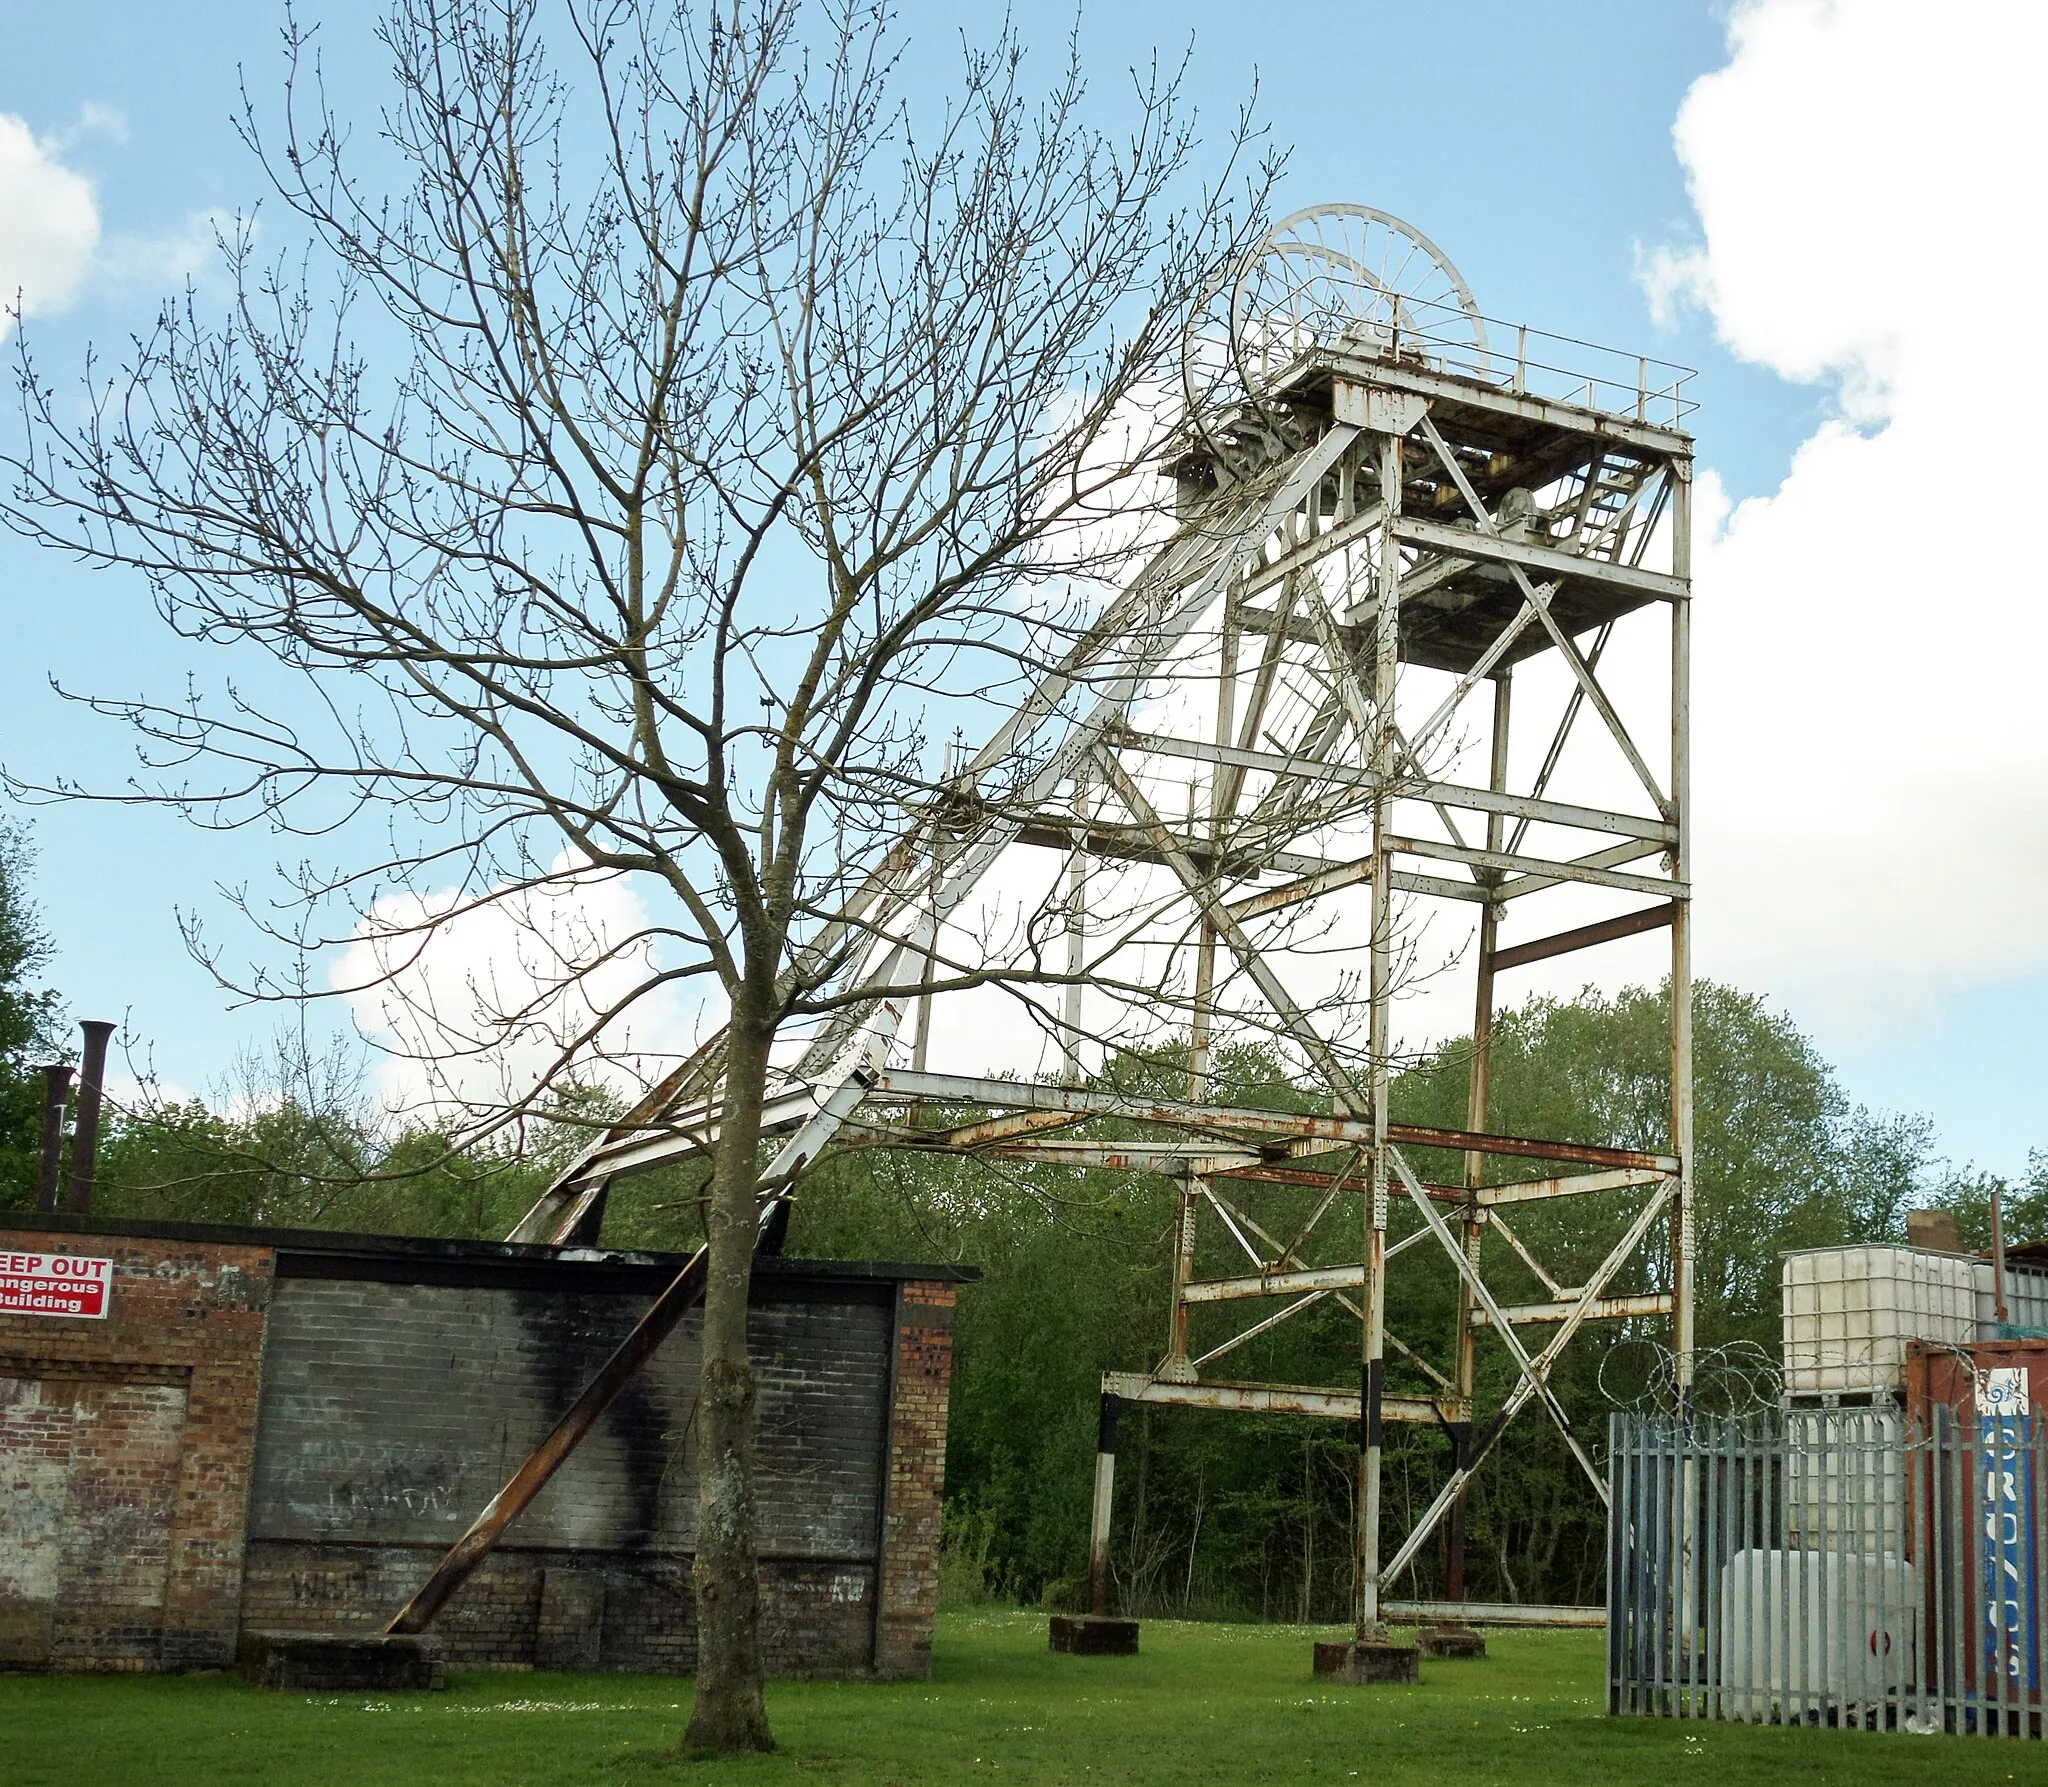 Photo showing: The old Highhouse Colliery winding gear and engine house, Auchinleck, East Ayrshire, Scotland.